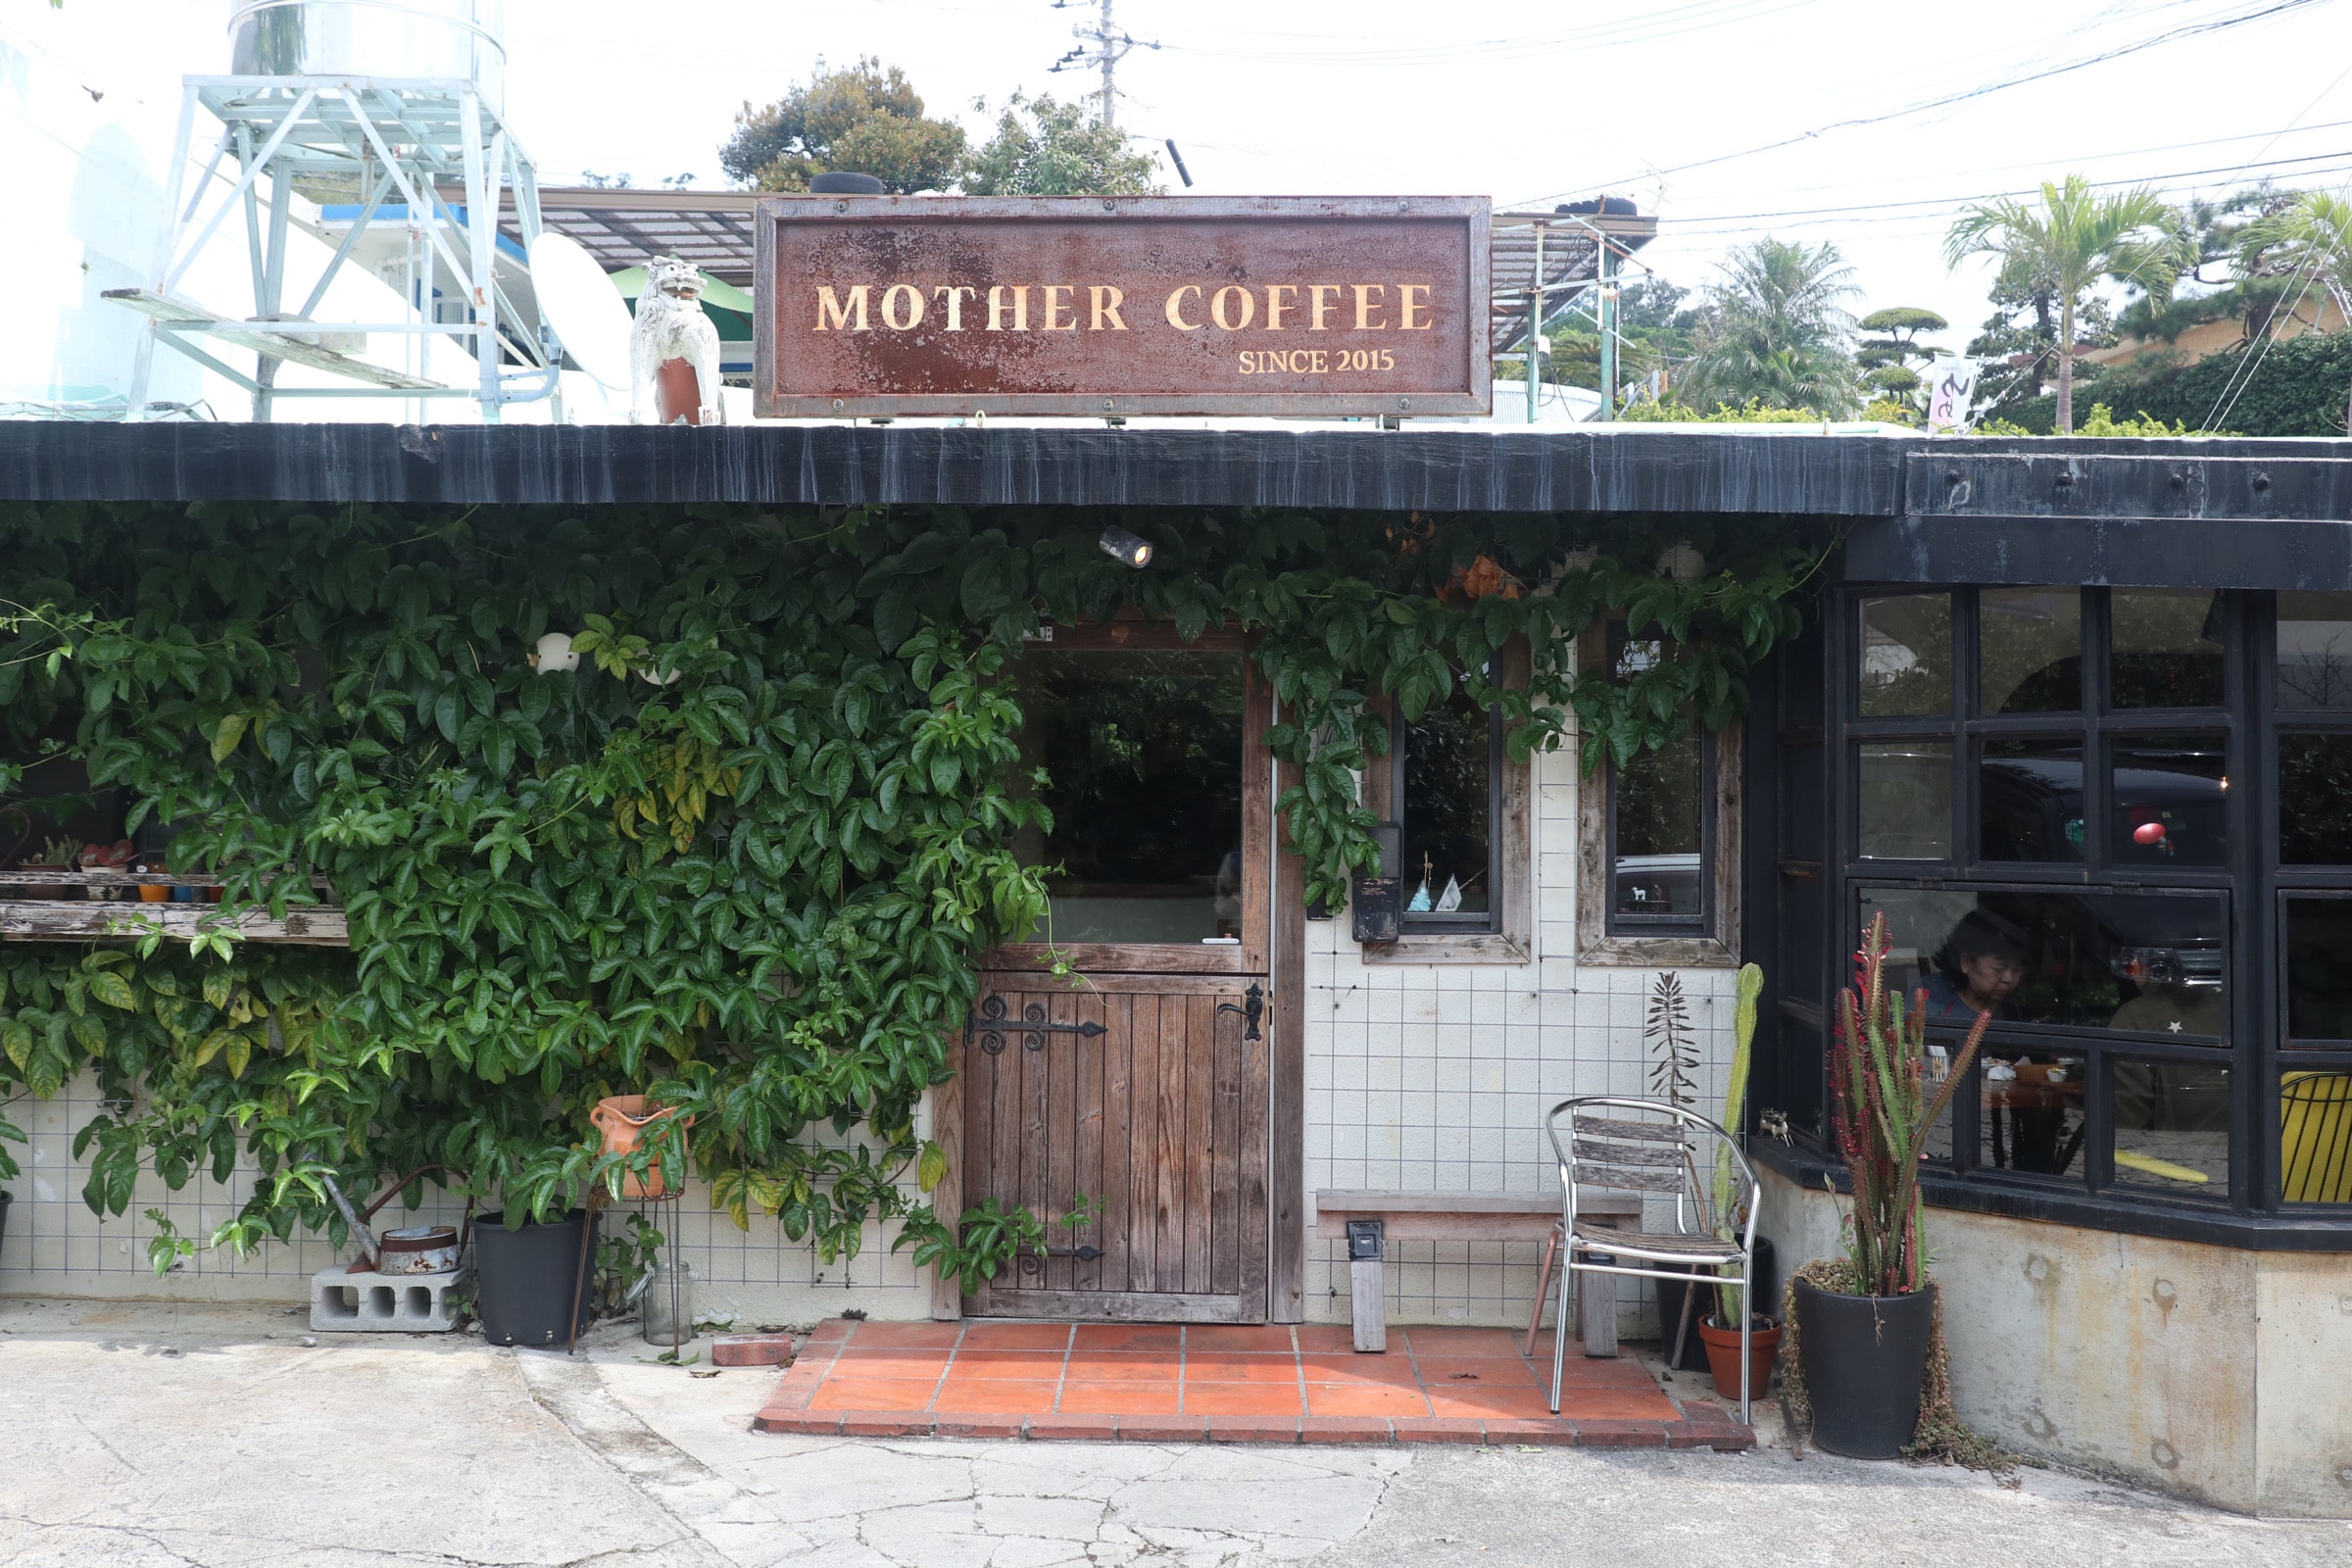 MOTHER COFFEE